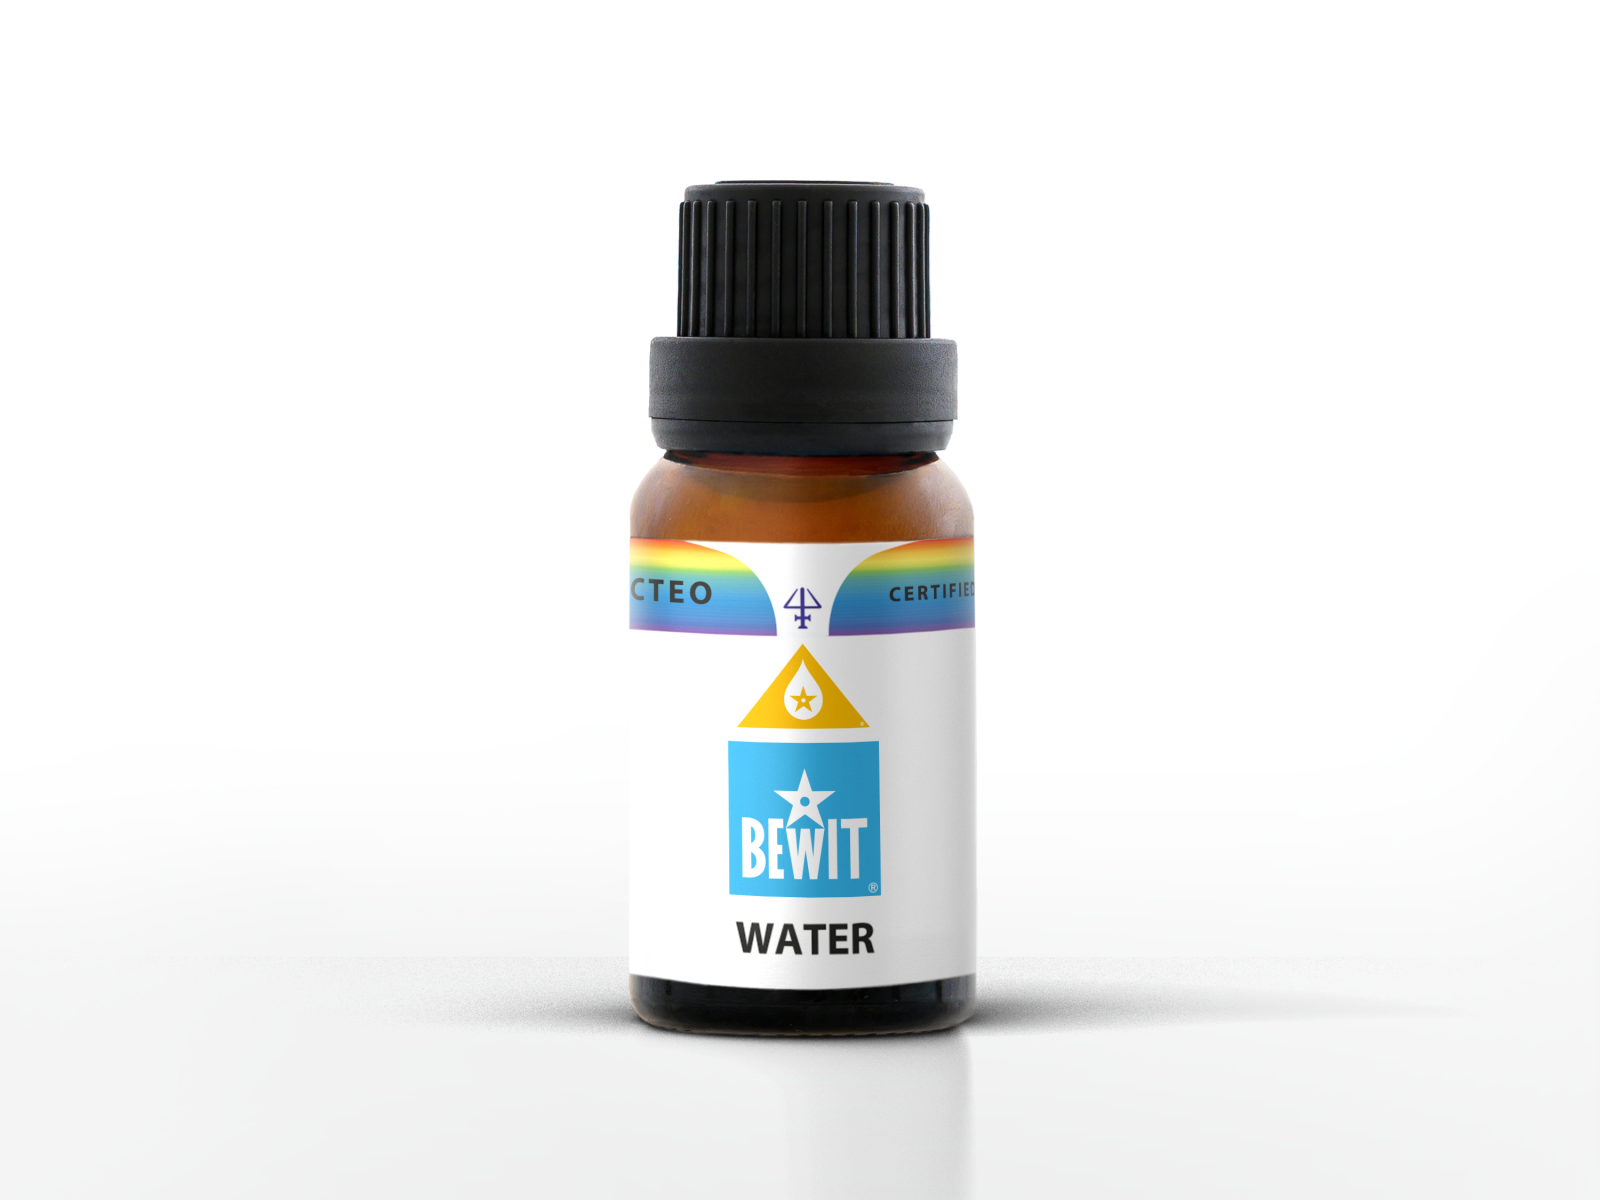 BEWIT WATER - Blend of essential oils - 1